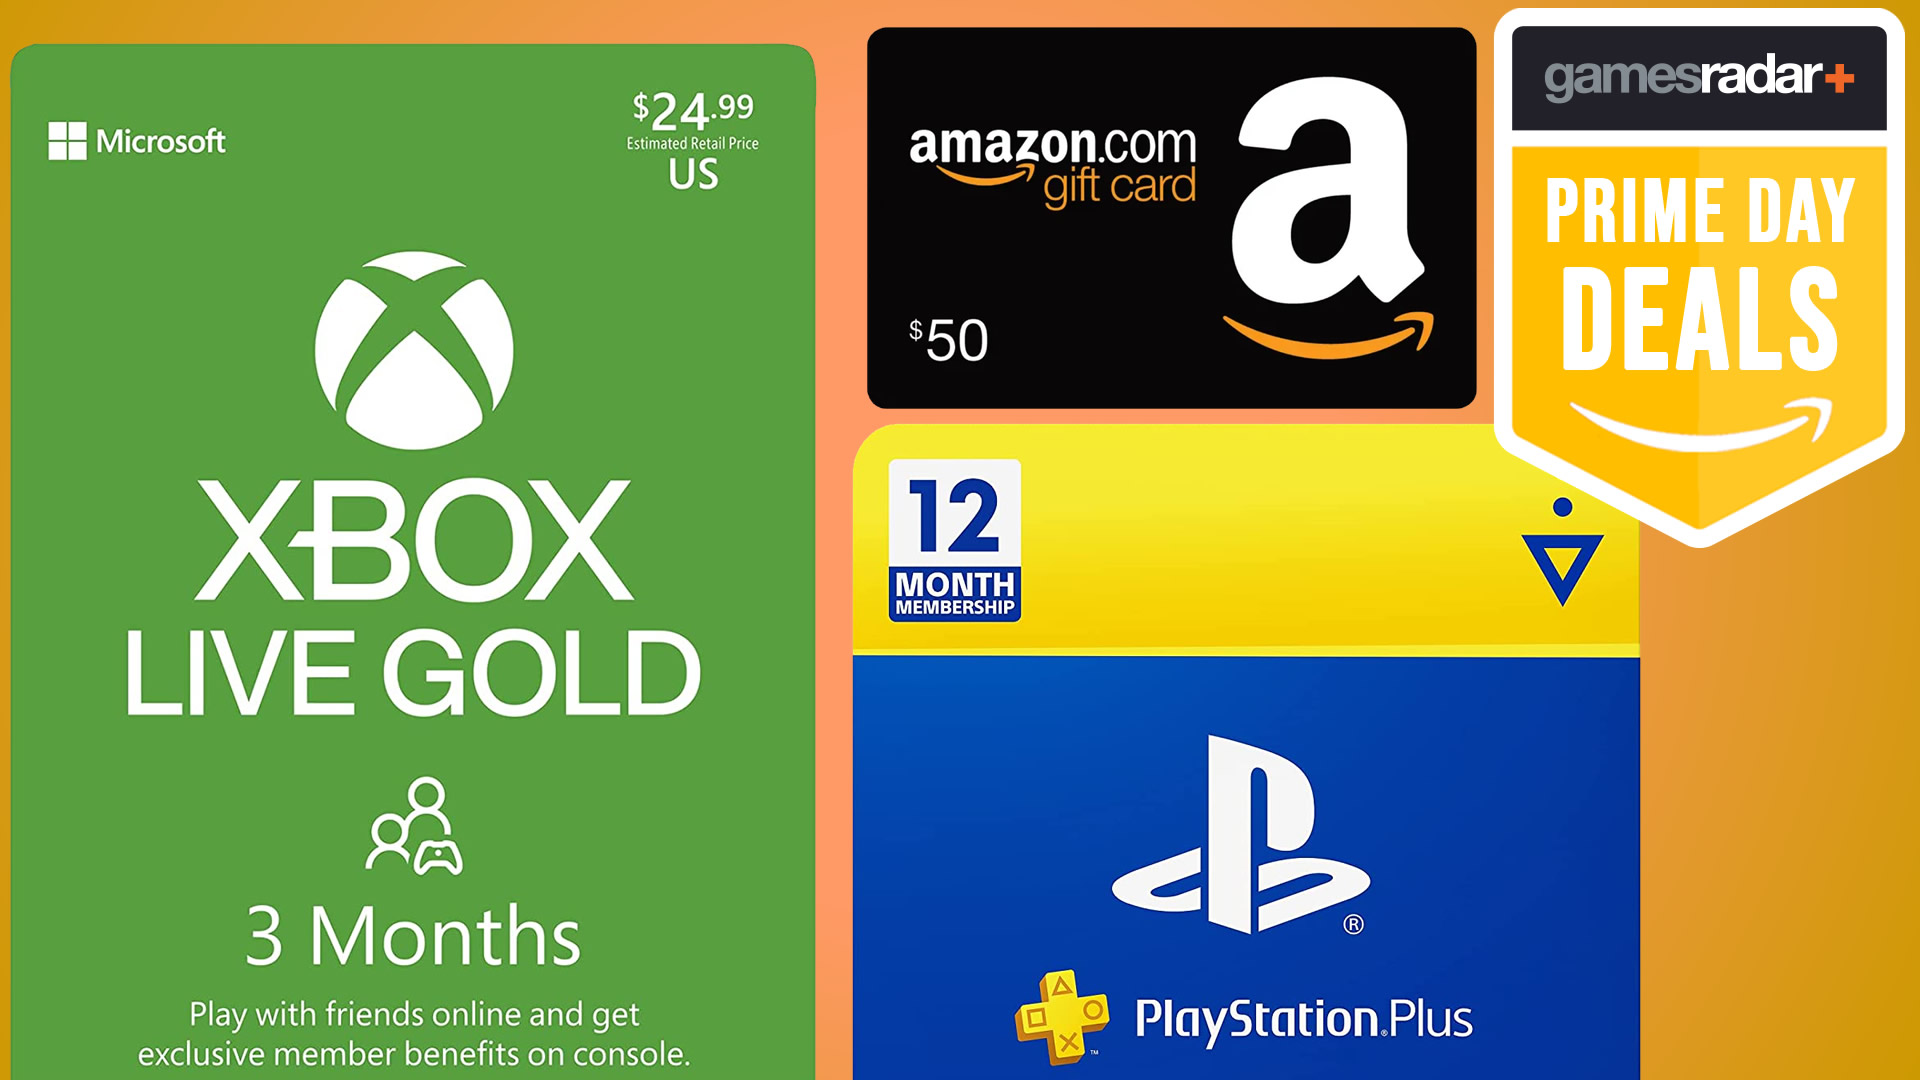 Prime Day gift card deals – what to expect this year